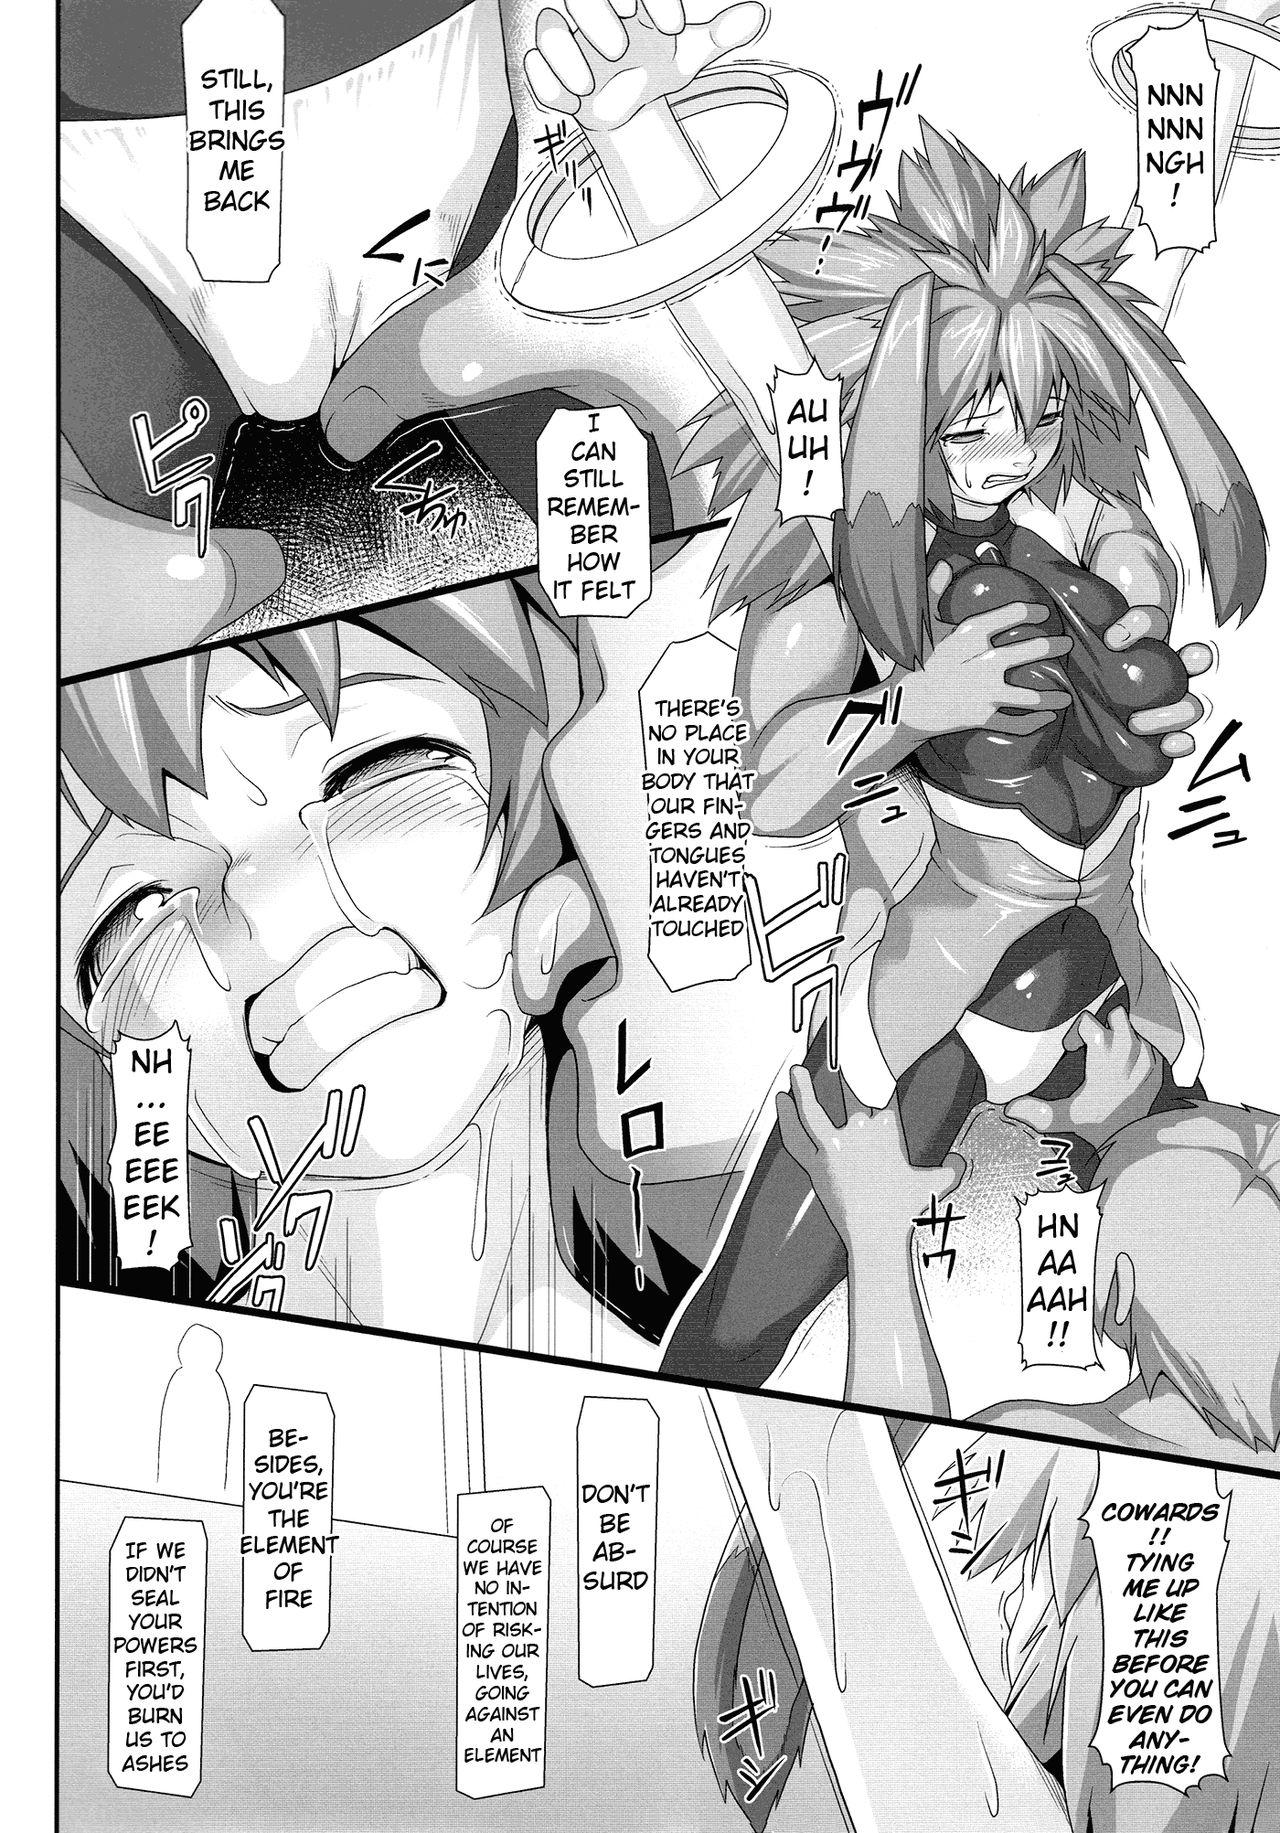 Full Movie Seraphic Gate 4 - Xenogears Camsex - Page 5